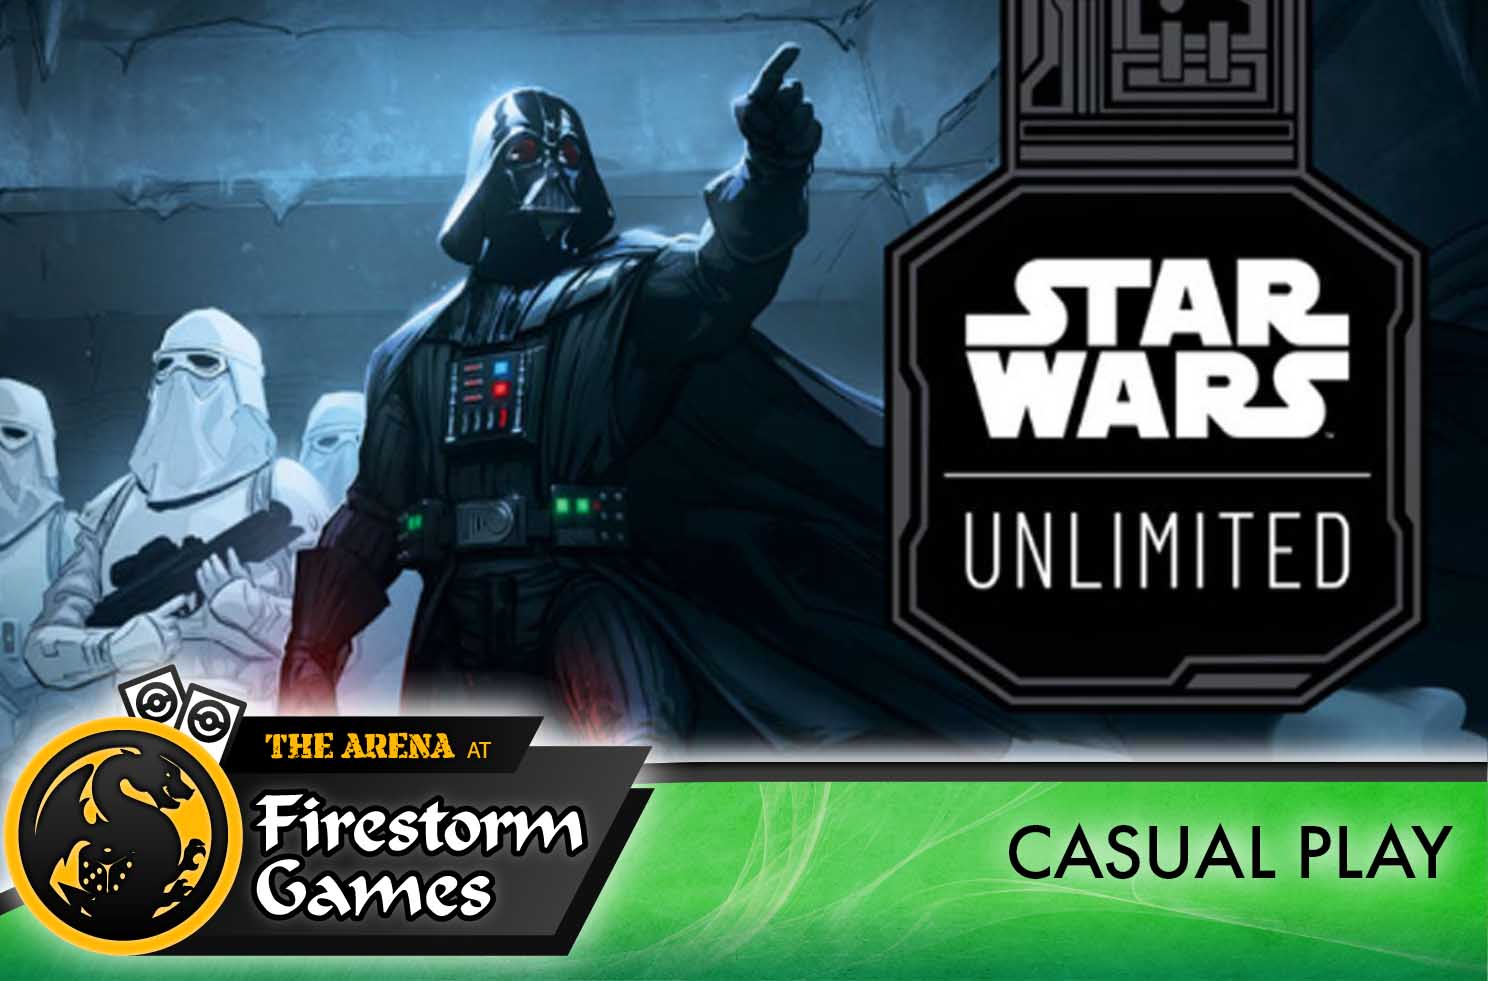 Star Wars: Unlimited Friday Casual Play